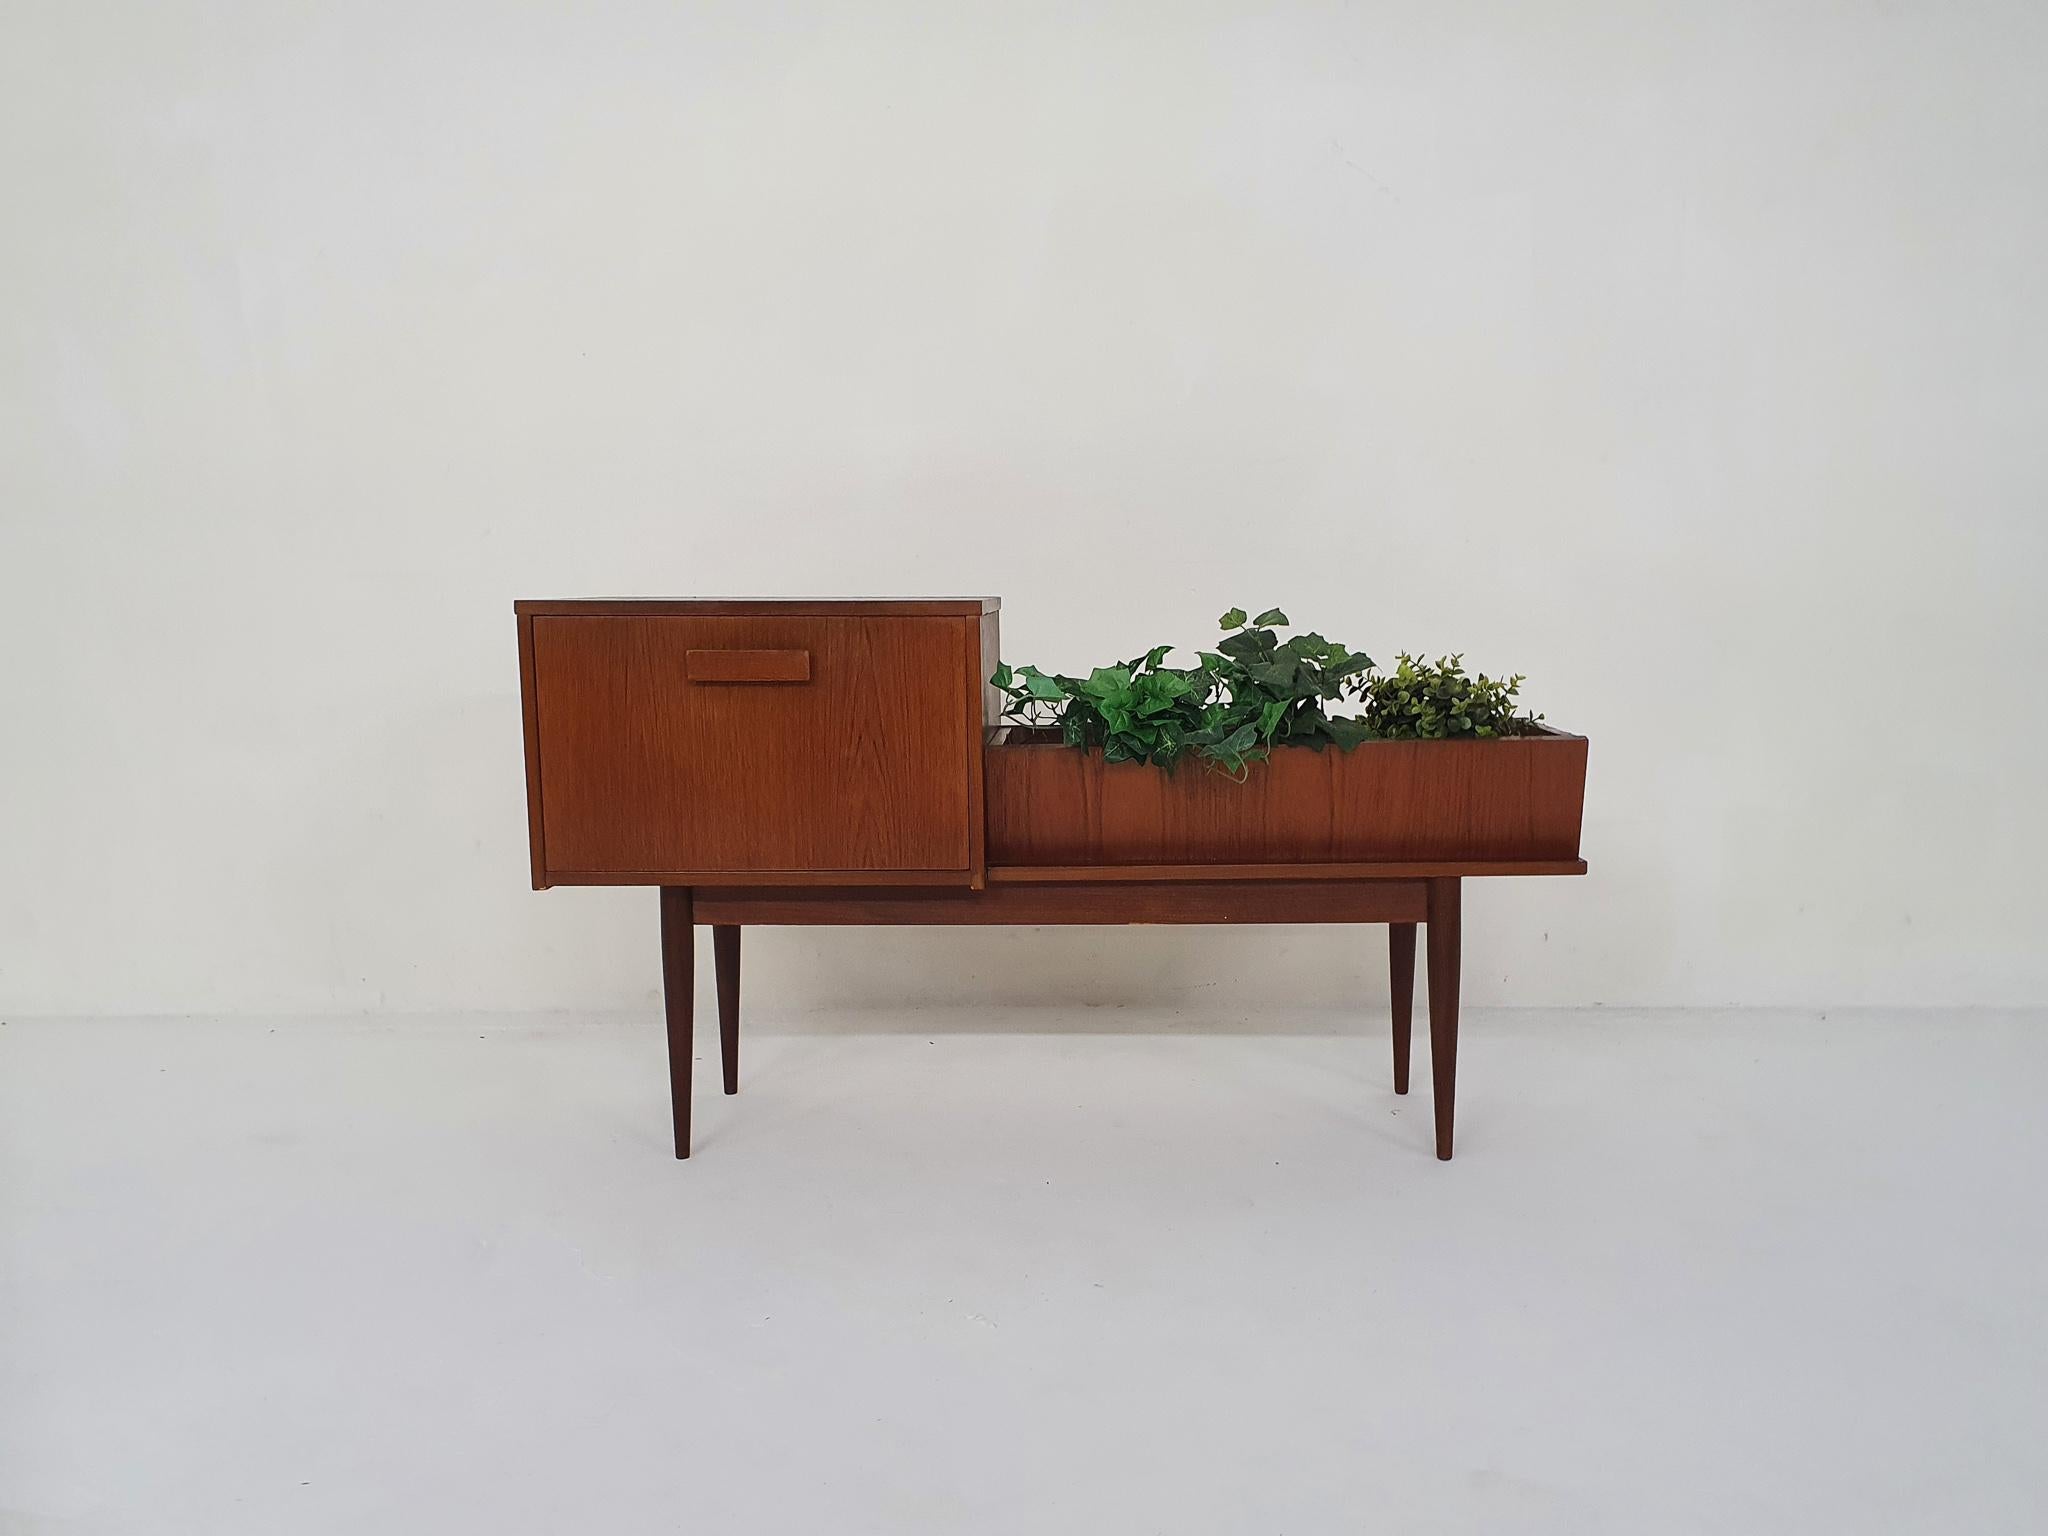 Scandinavian Modern Mid-century cabinet with plant stand, The Netherlands 1950's